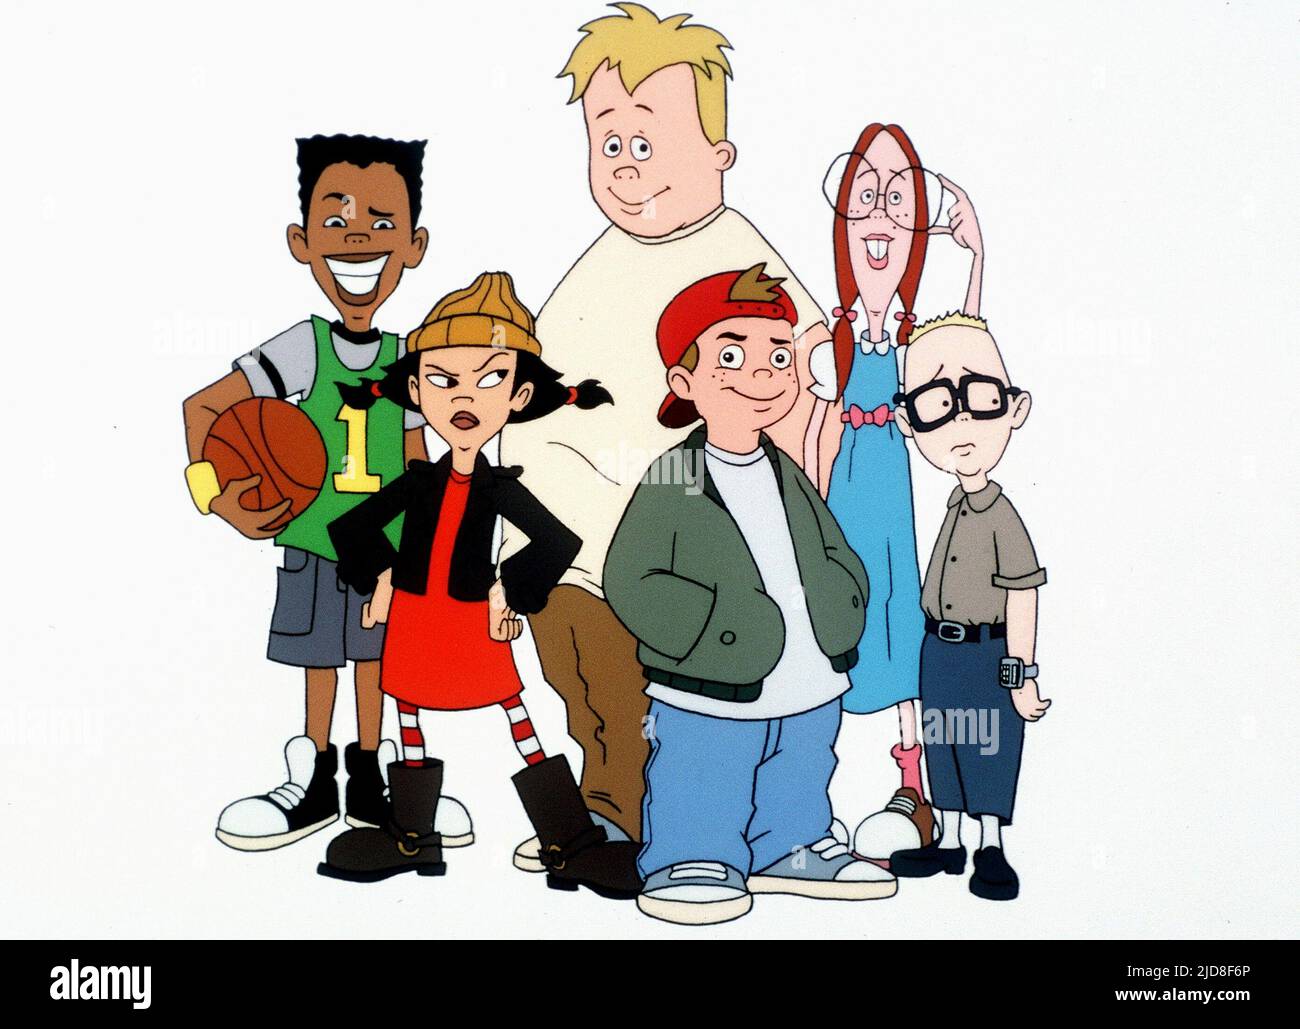 VINCE,SPINELLI,MIKEY,GUS,GRETCHEN,GUS, RECESS: SCHOOL'S OUT, 2001, Stock Photo